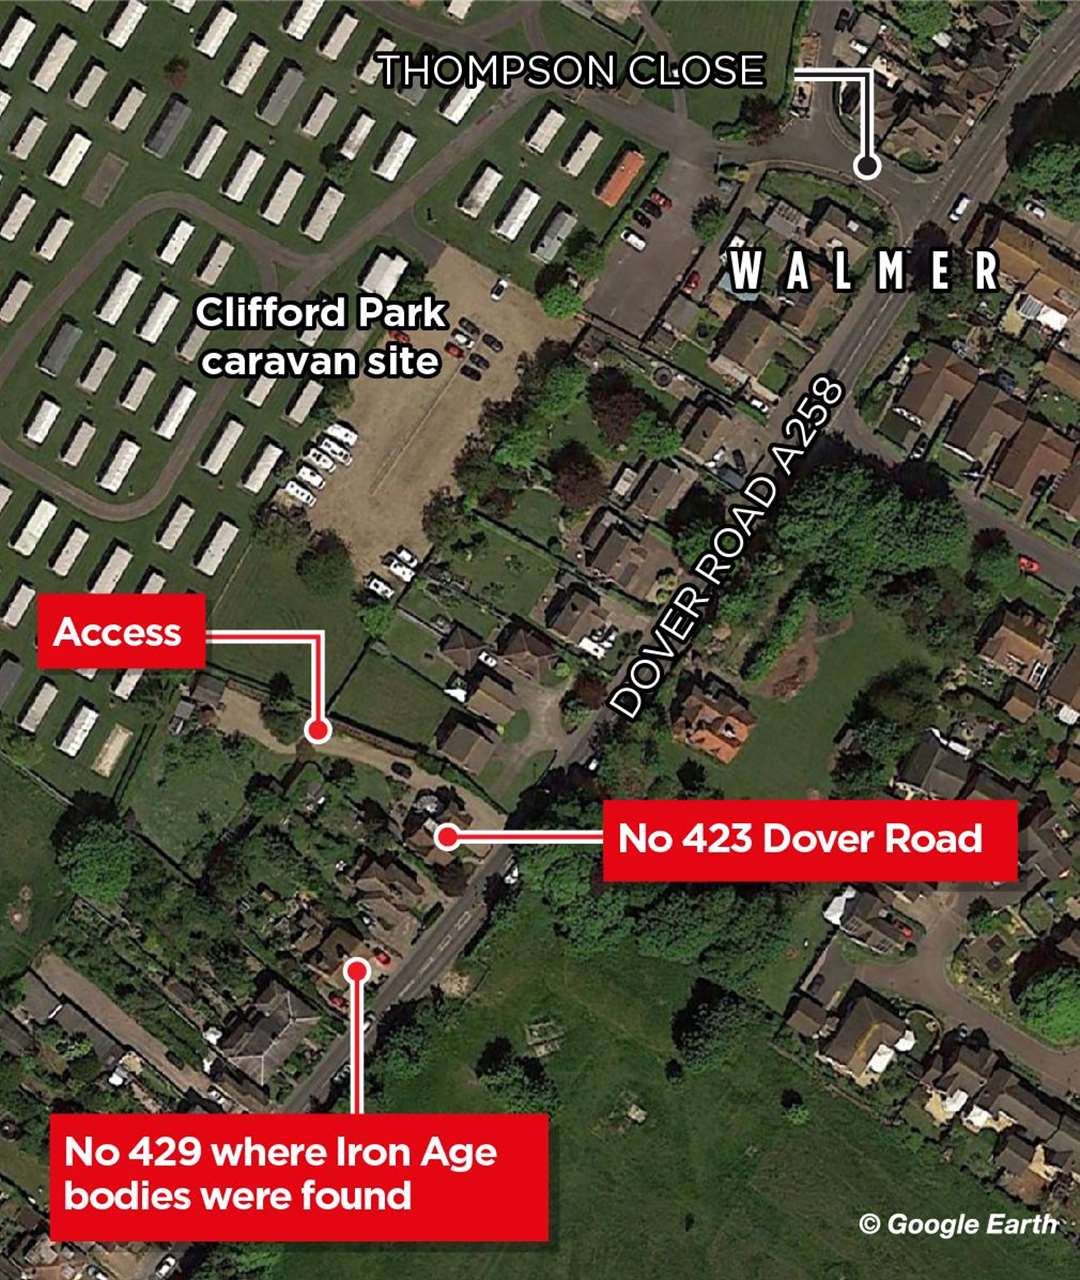 Plans to build two homes in Walmer are close to the Iron Age burial site